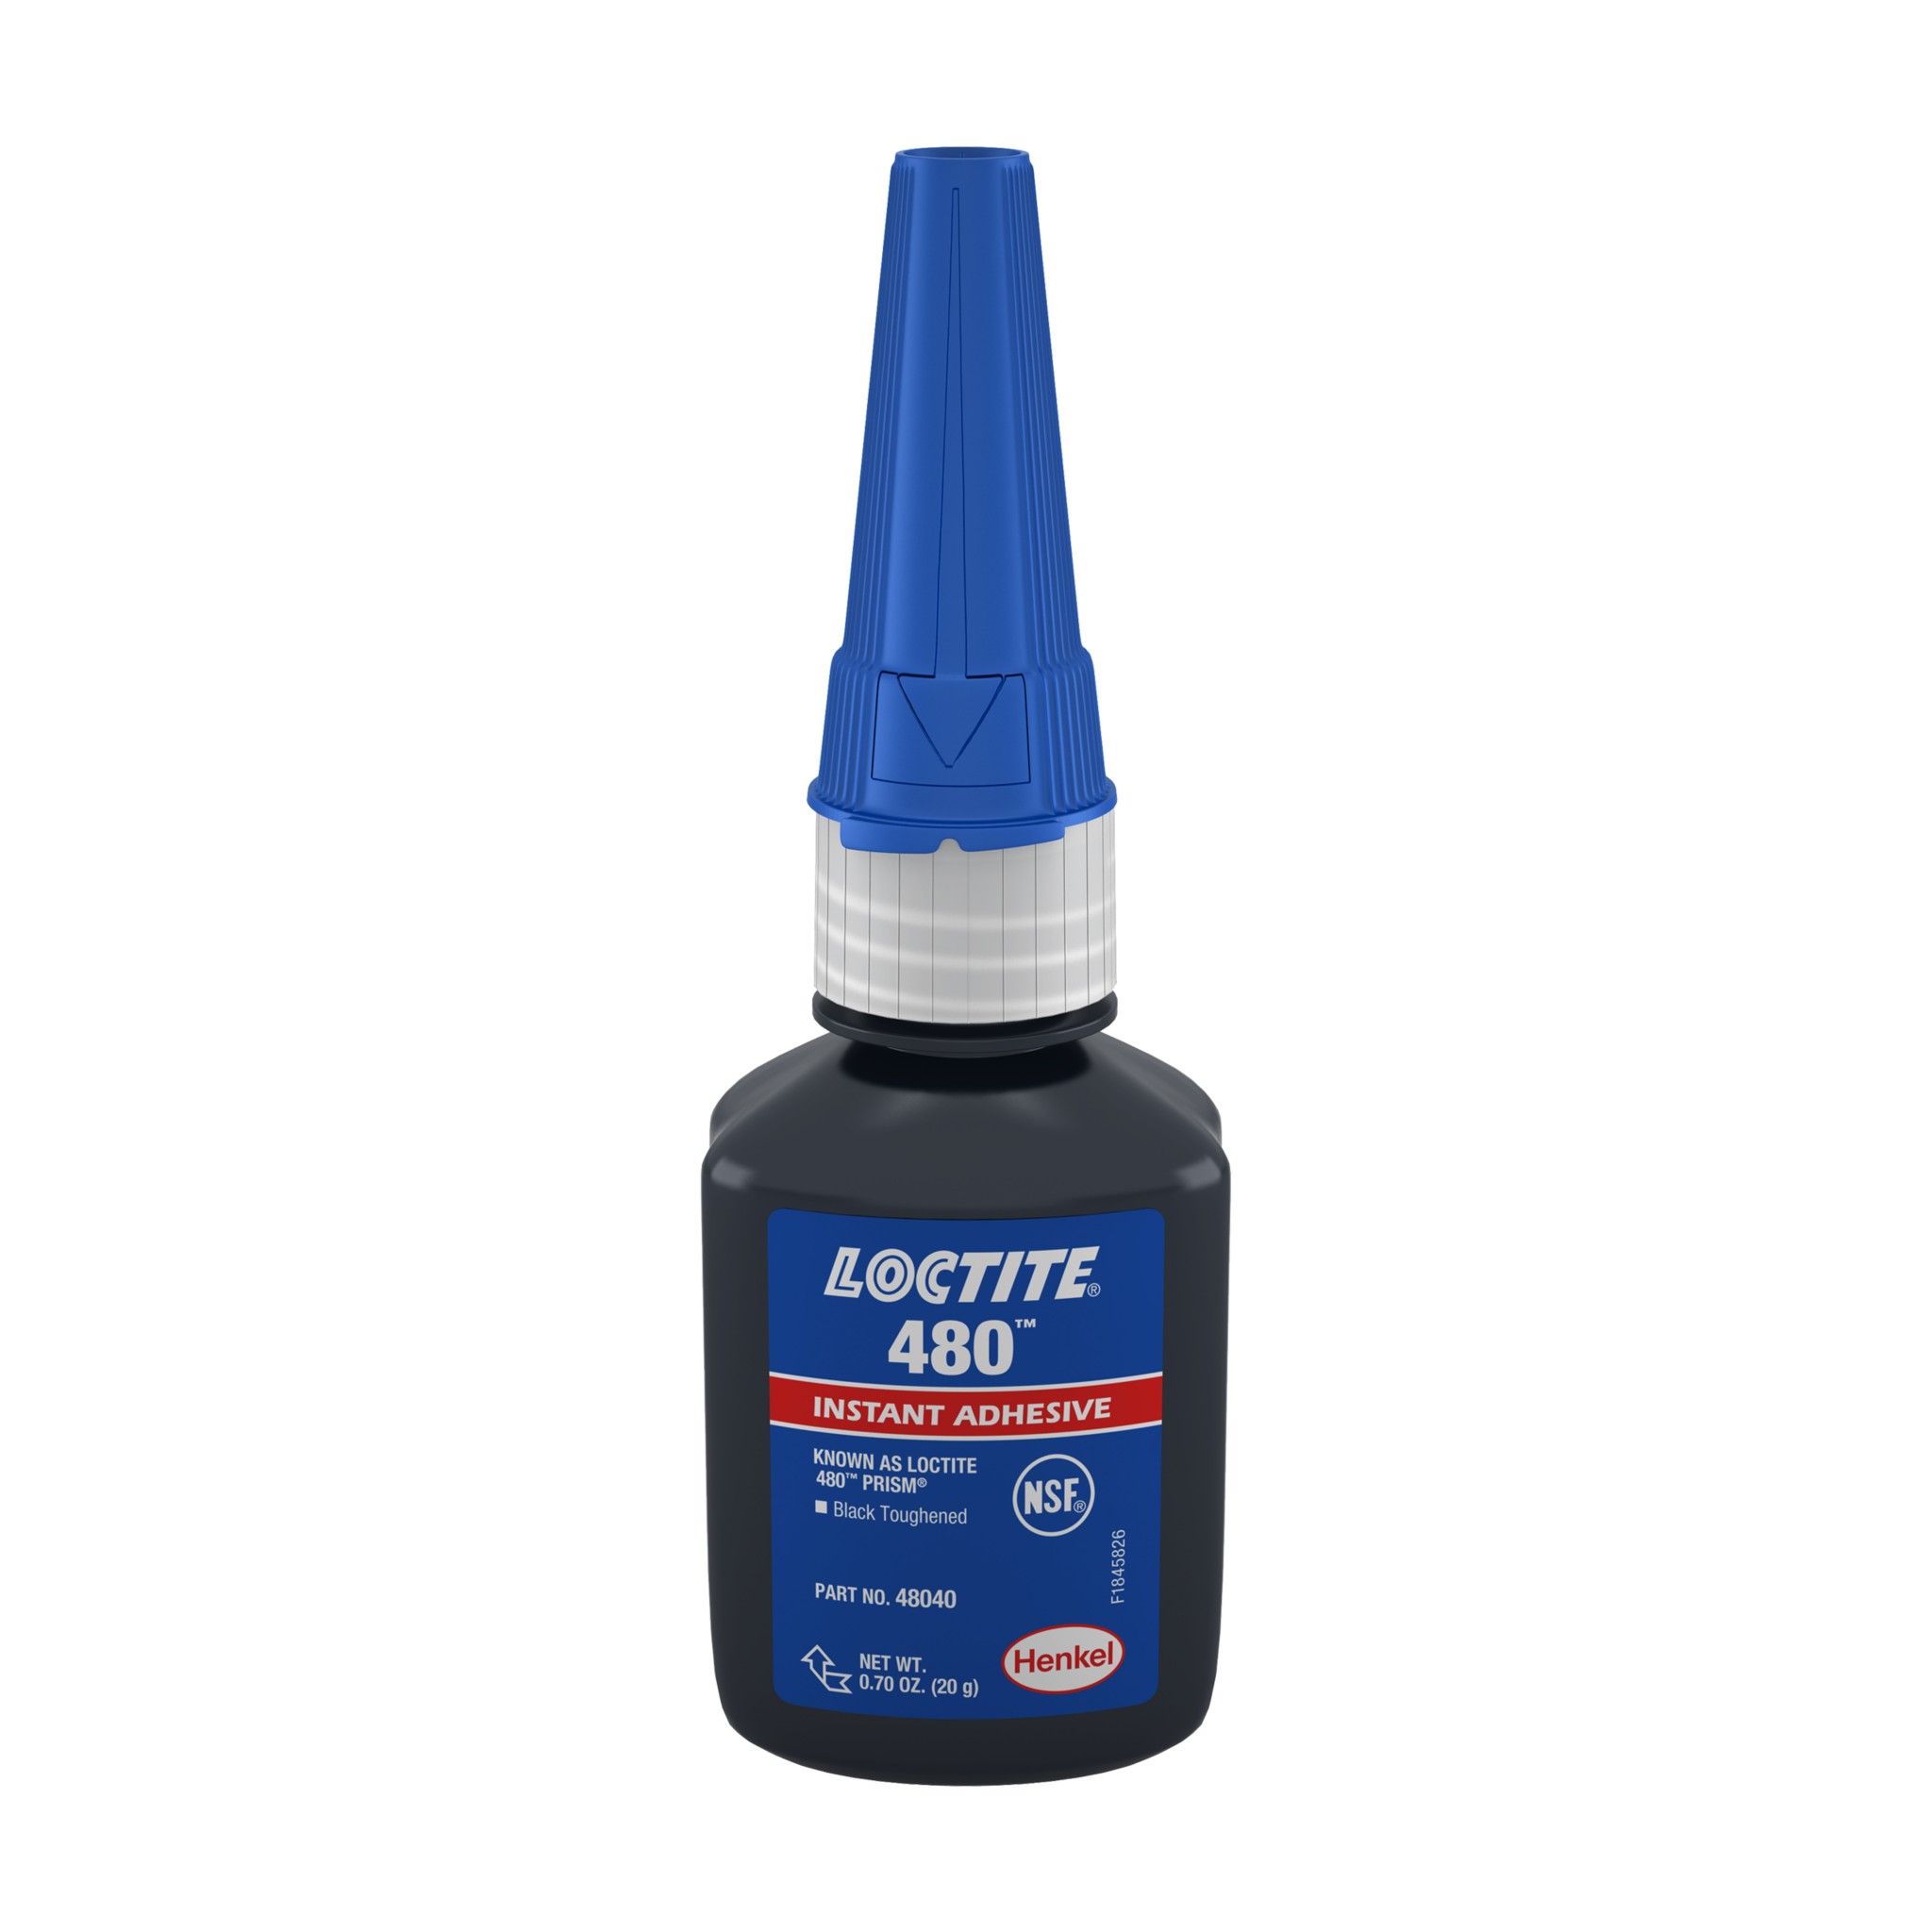 Loctite plastic glue? Has anyone ever used this for a model car